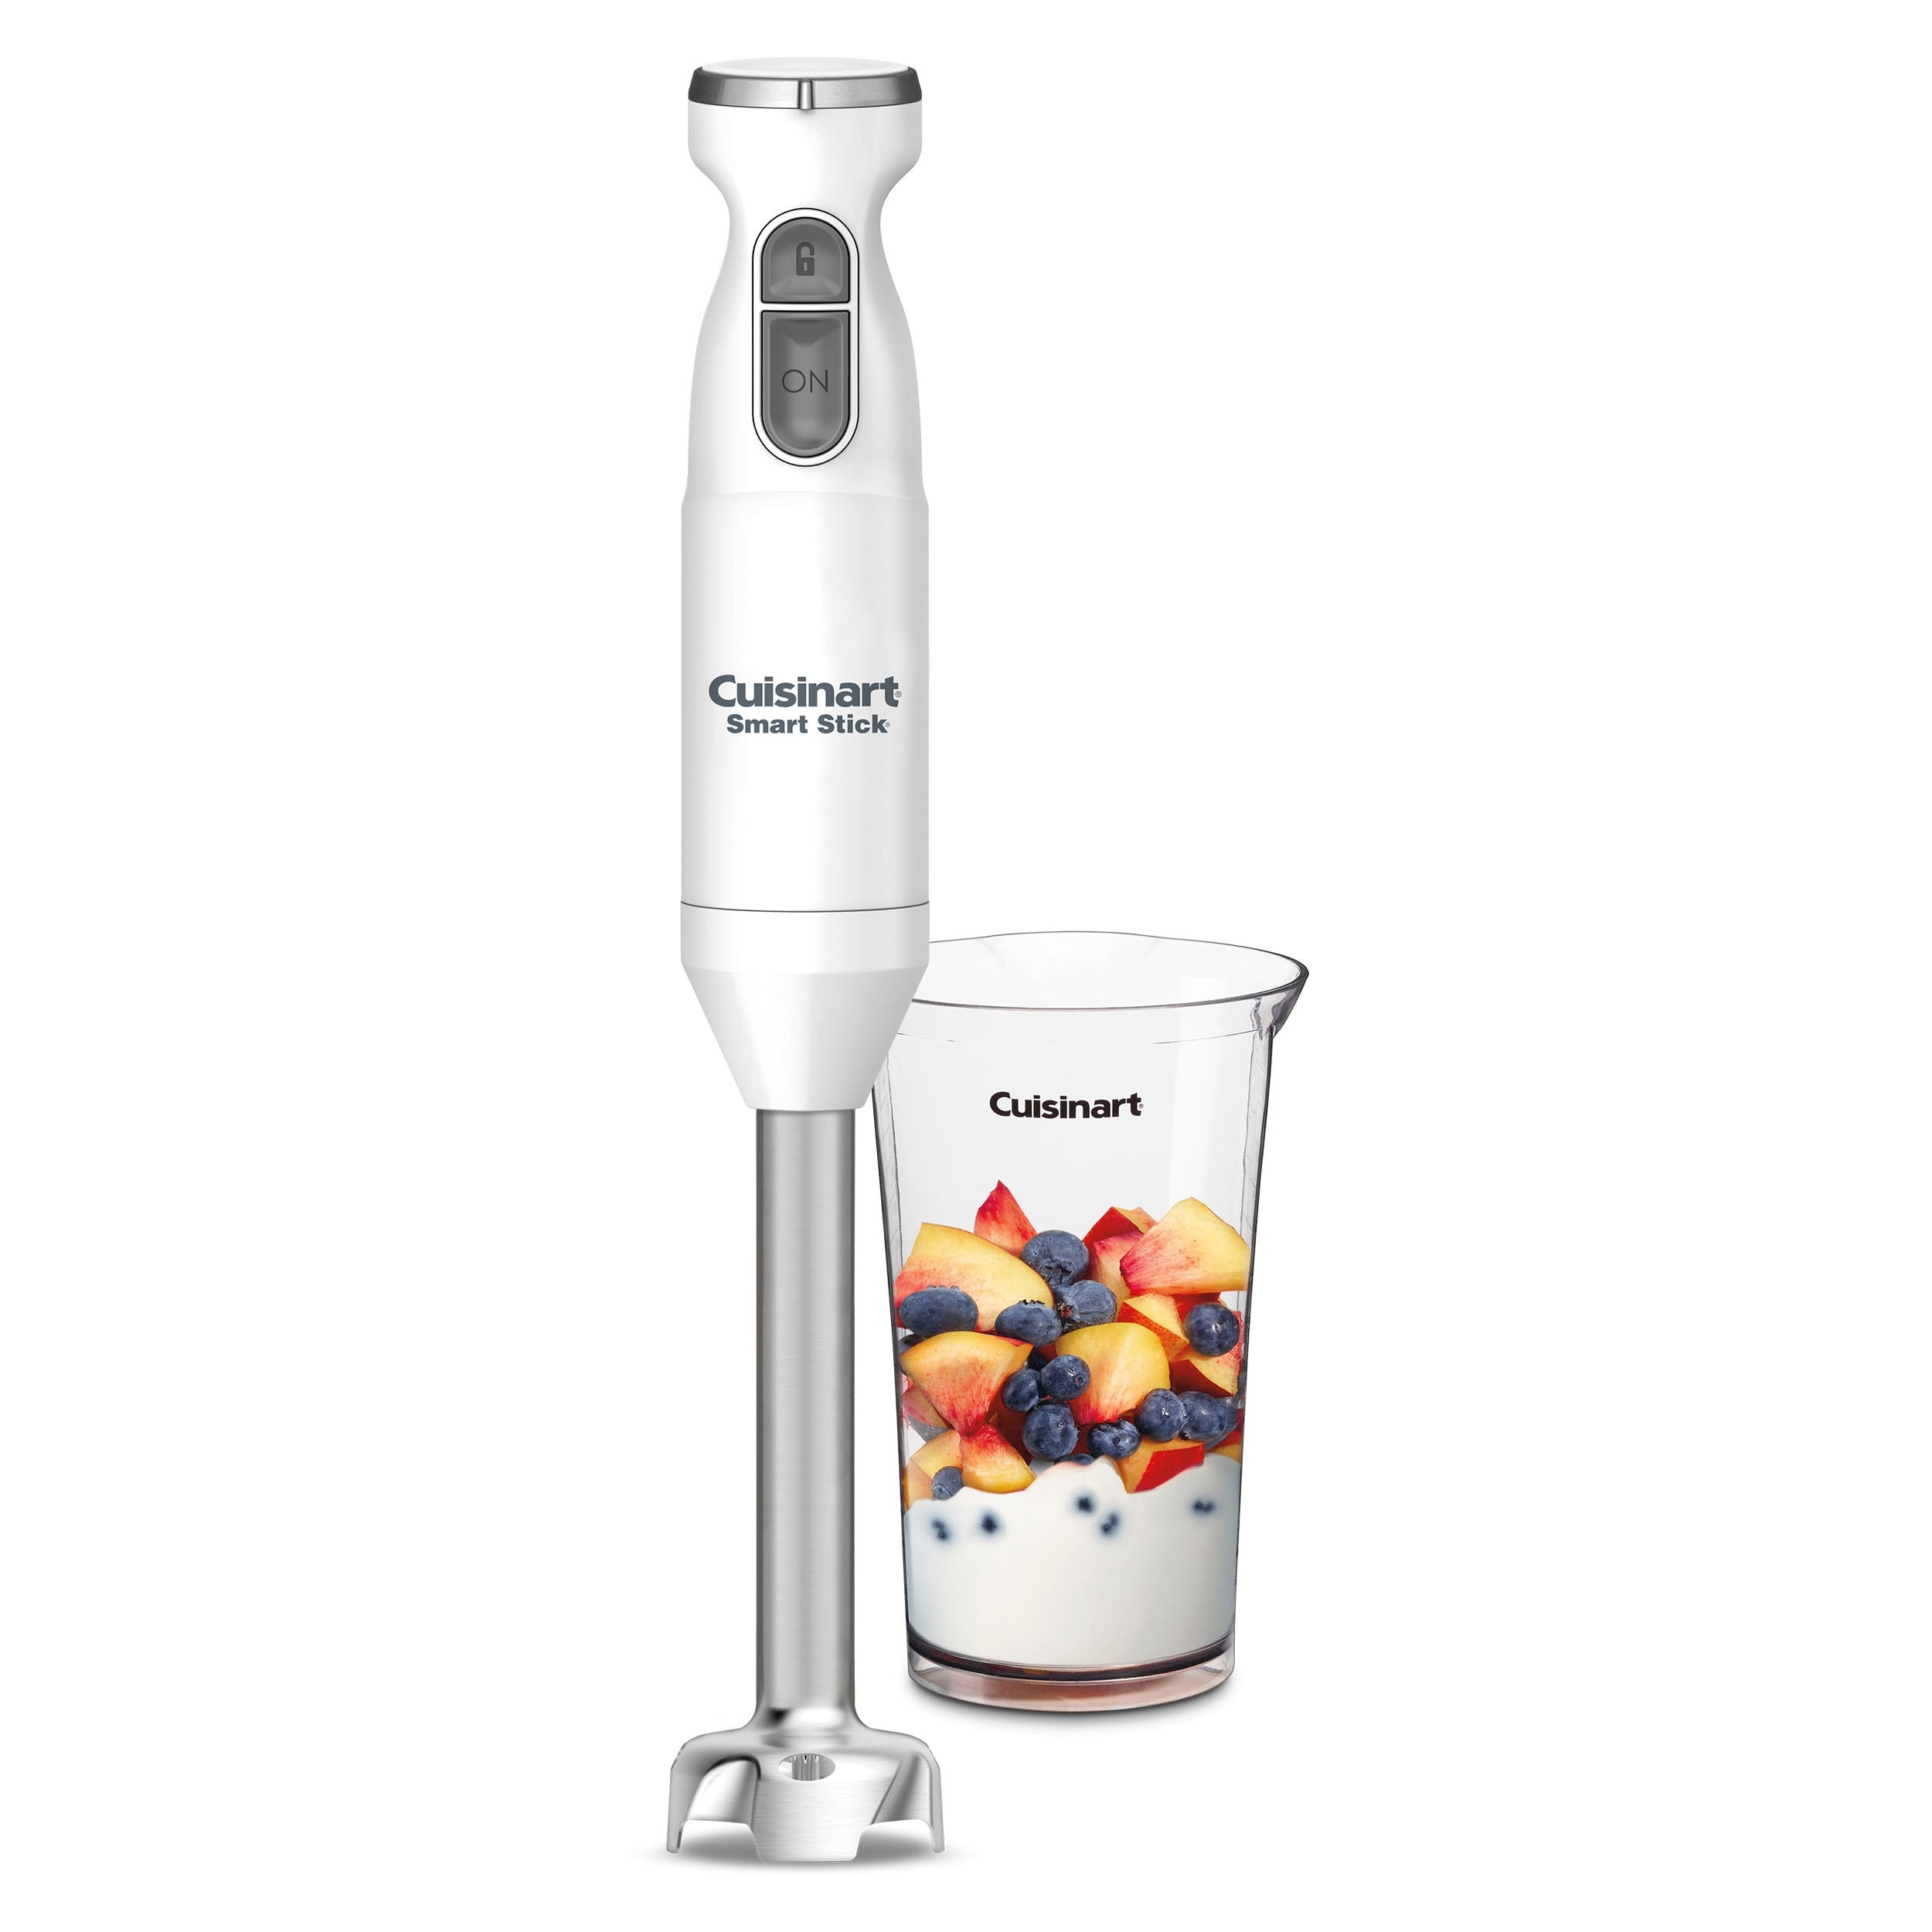 https://ak1.ostkcdn.com/images/products/is/images/direct/2fd80df0273eff878b30992fe62489cdd72ff80f/Cuisinart-Smart-Stick-Two-Speed-Hand-Blender.jpg